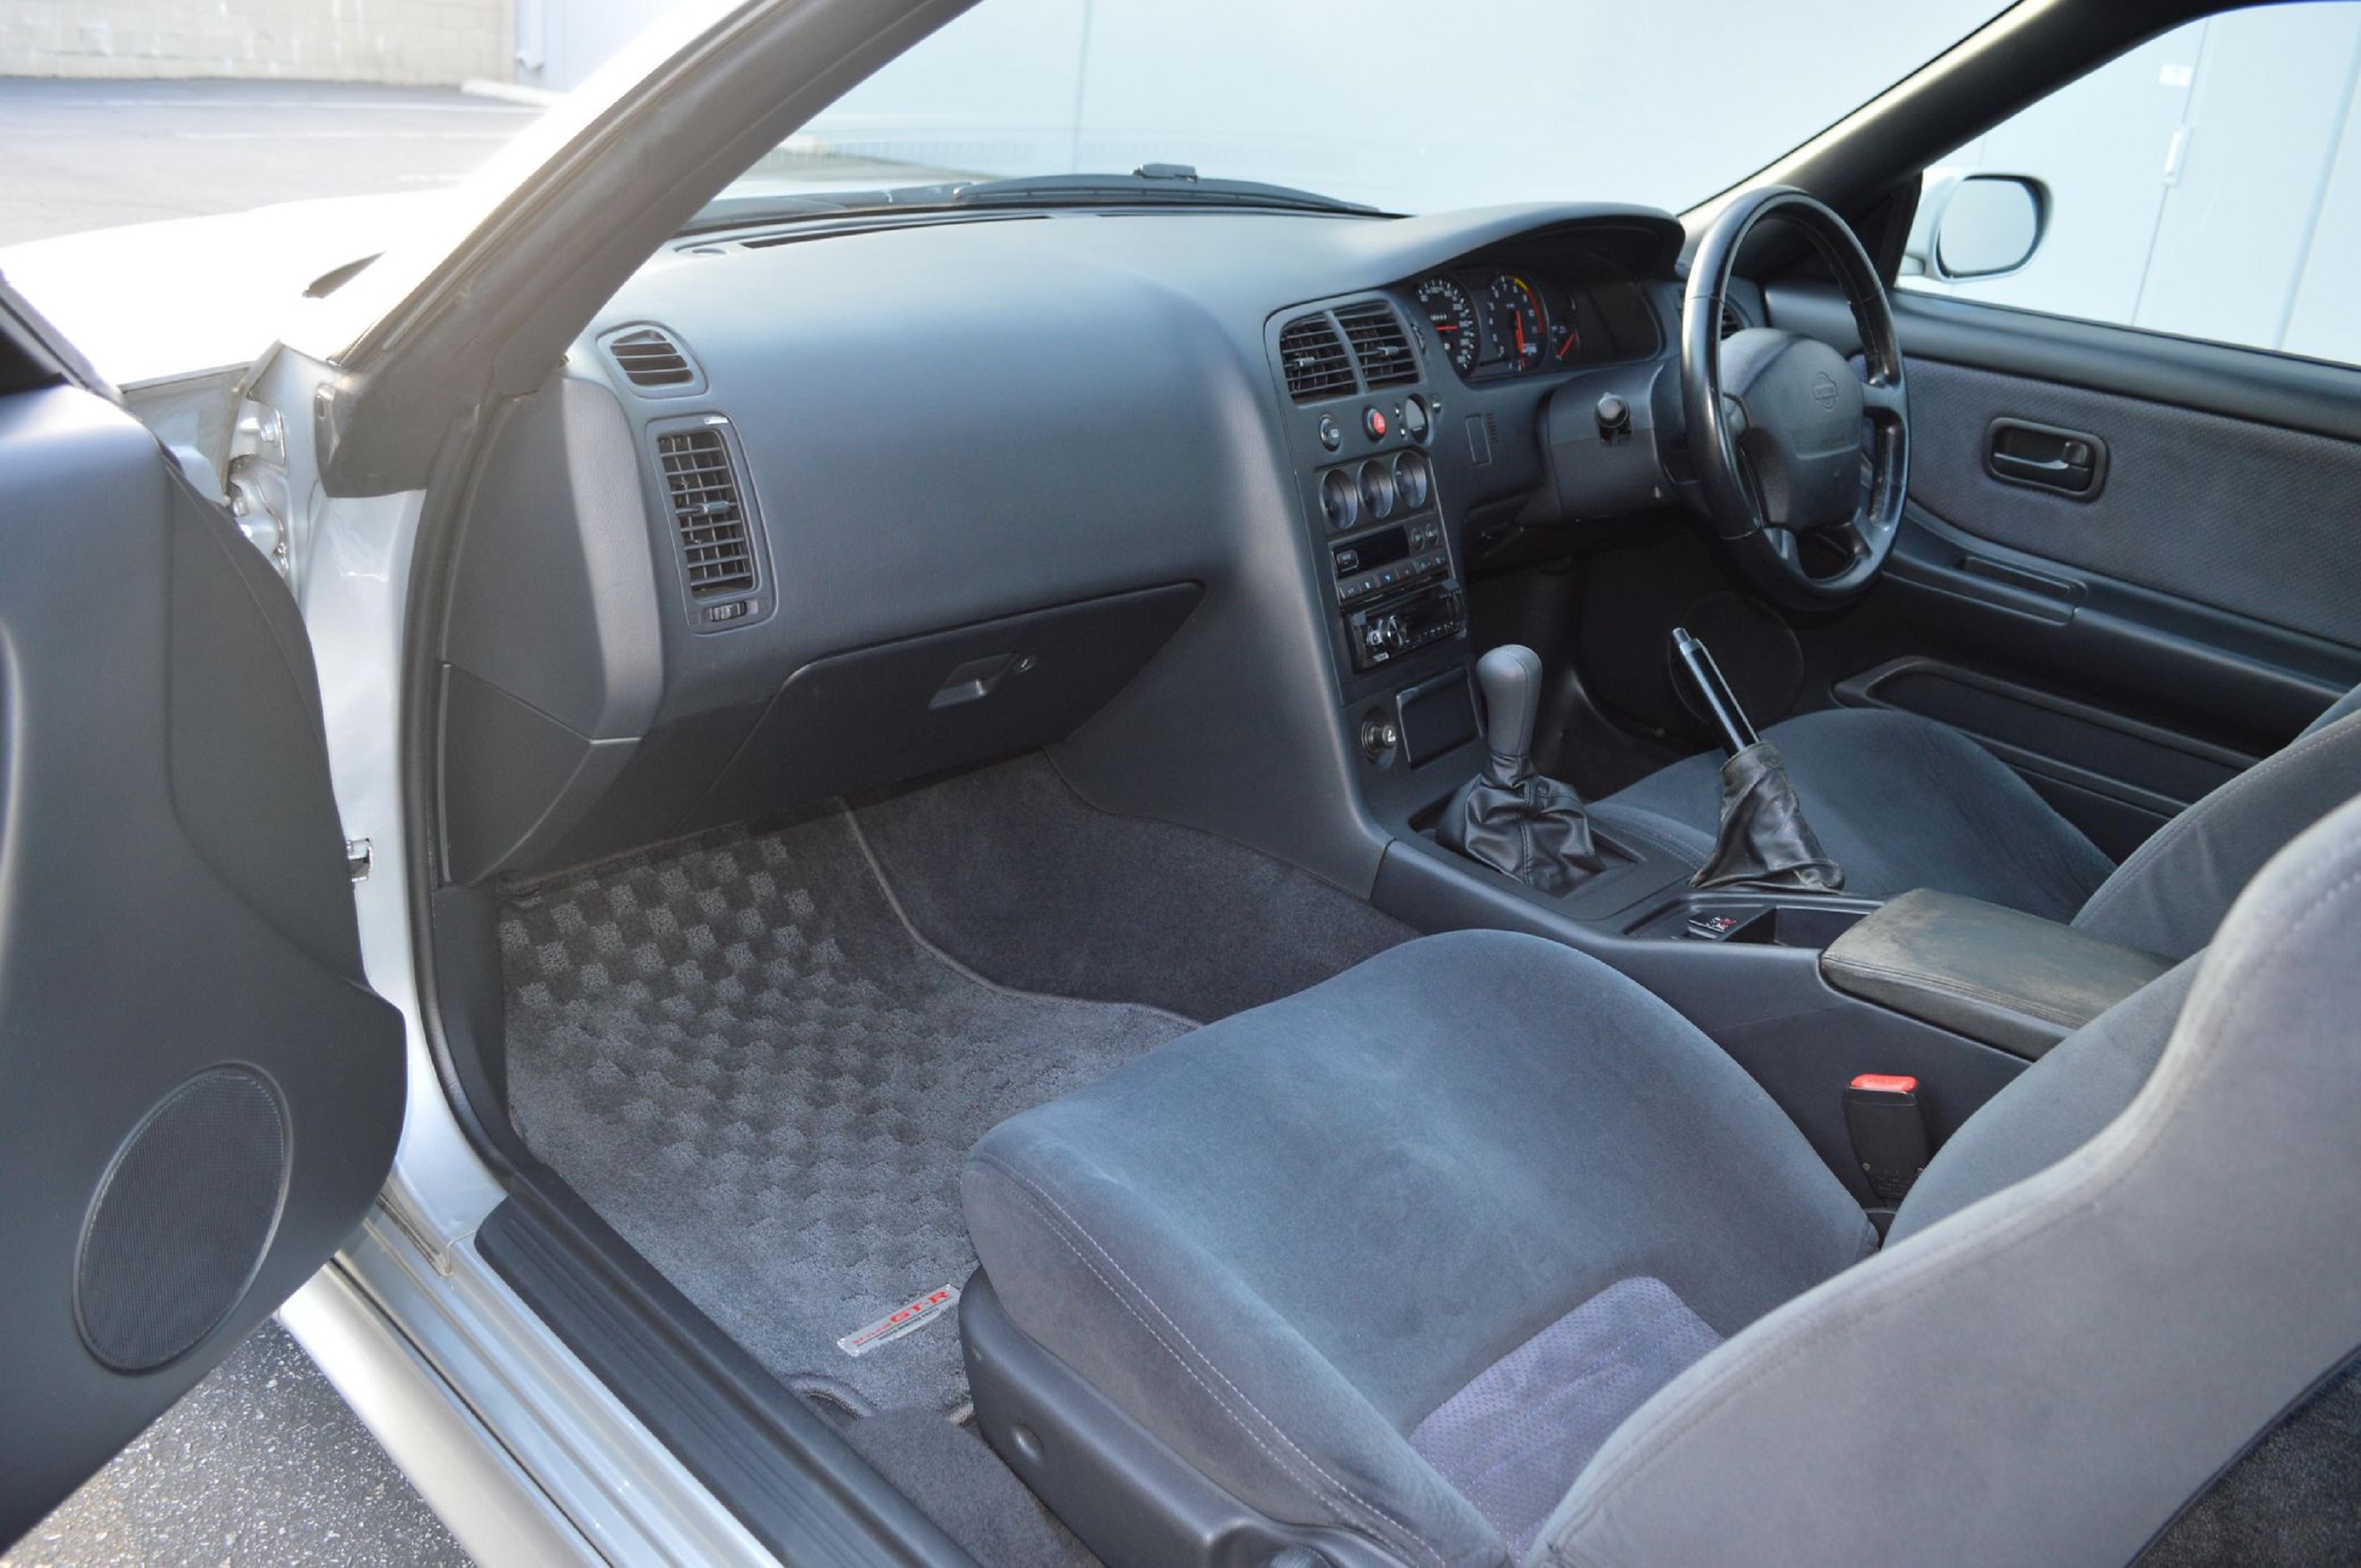 The gray front sports seats and black dashboard of a 1995 Nissan R33 Skyline GT-R